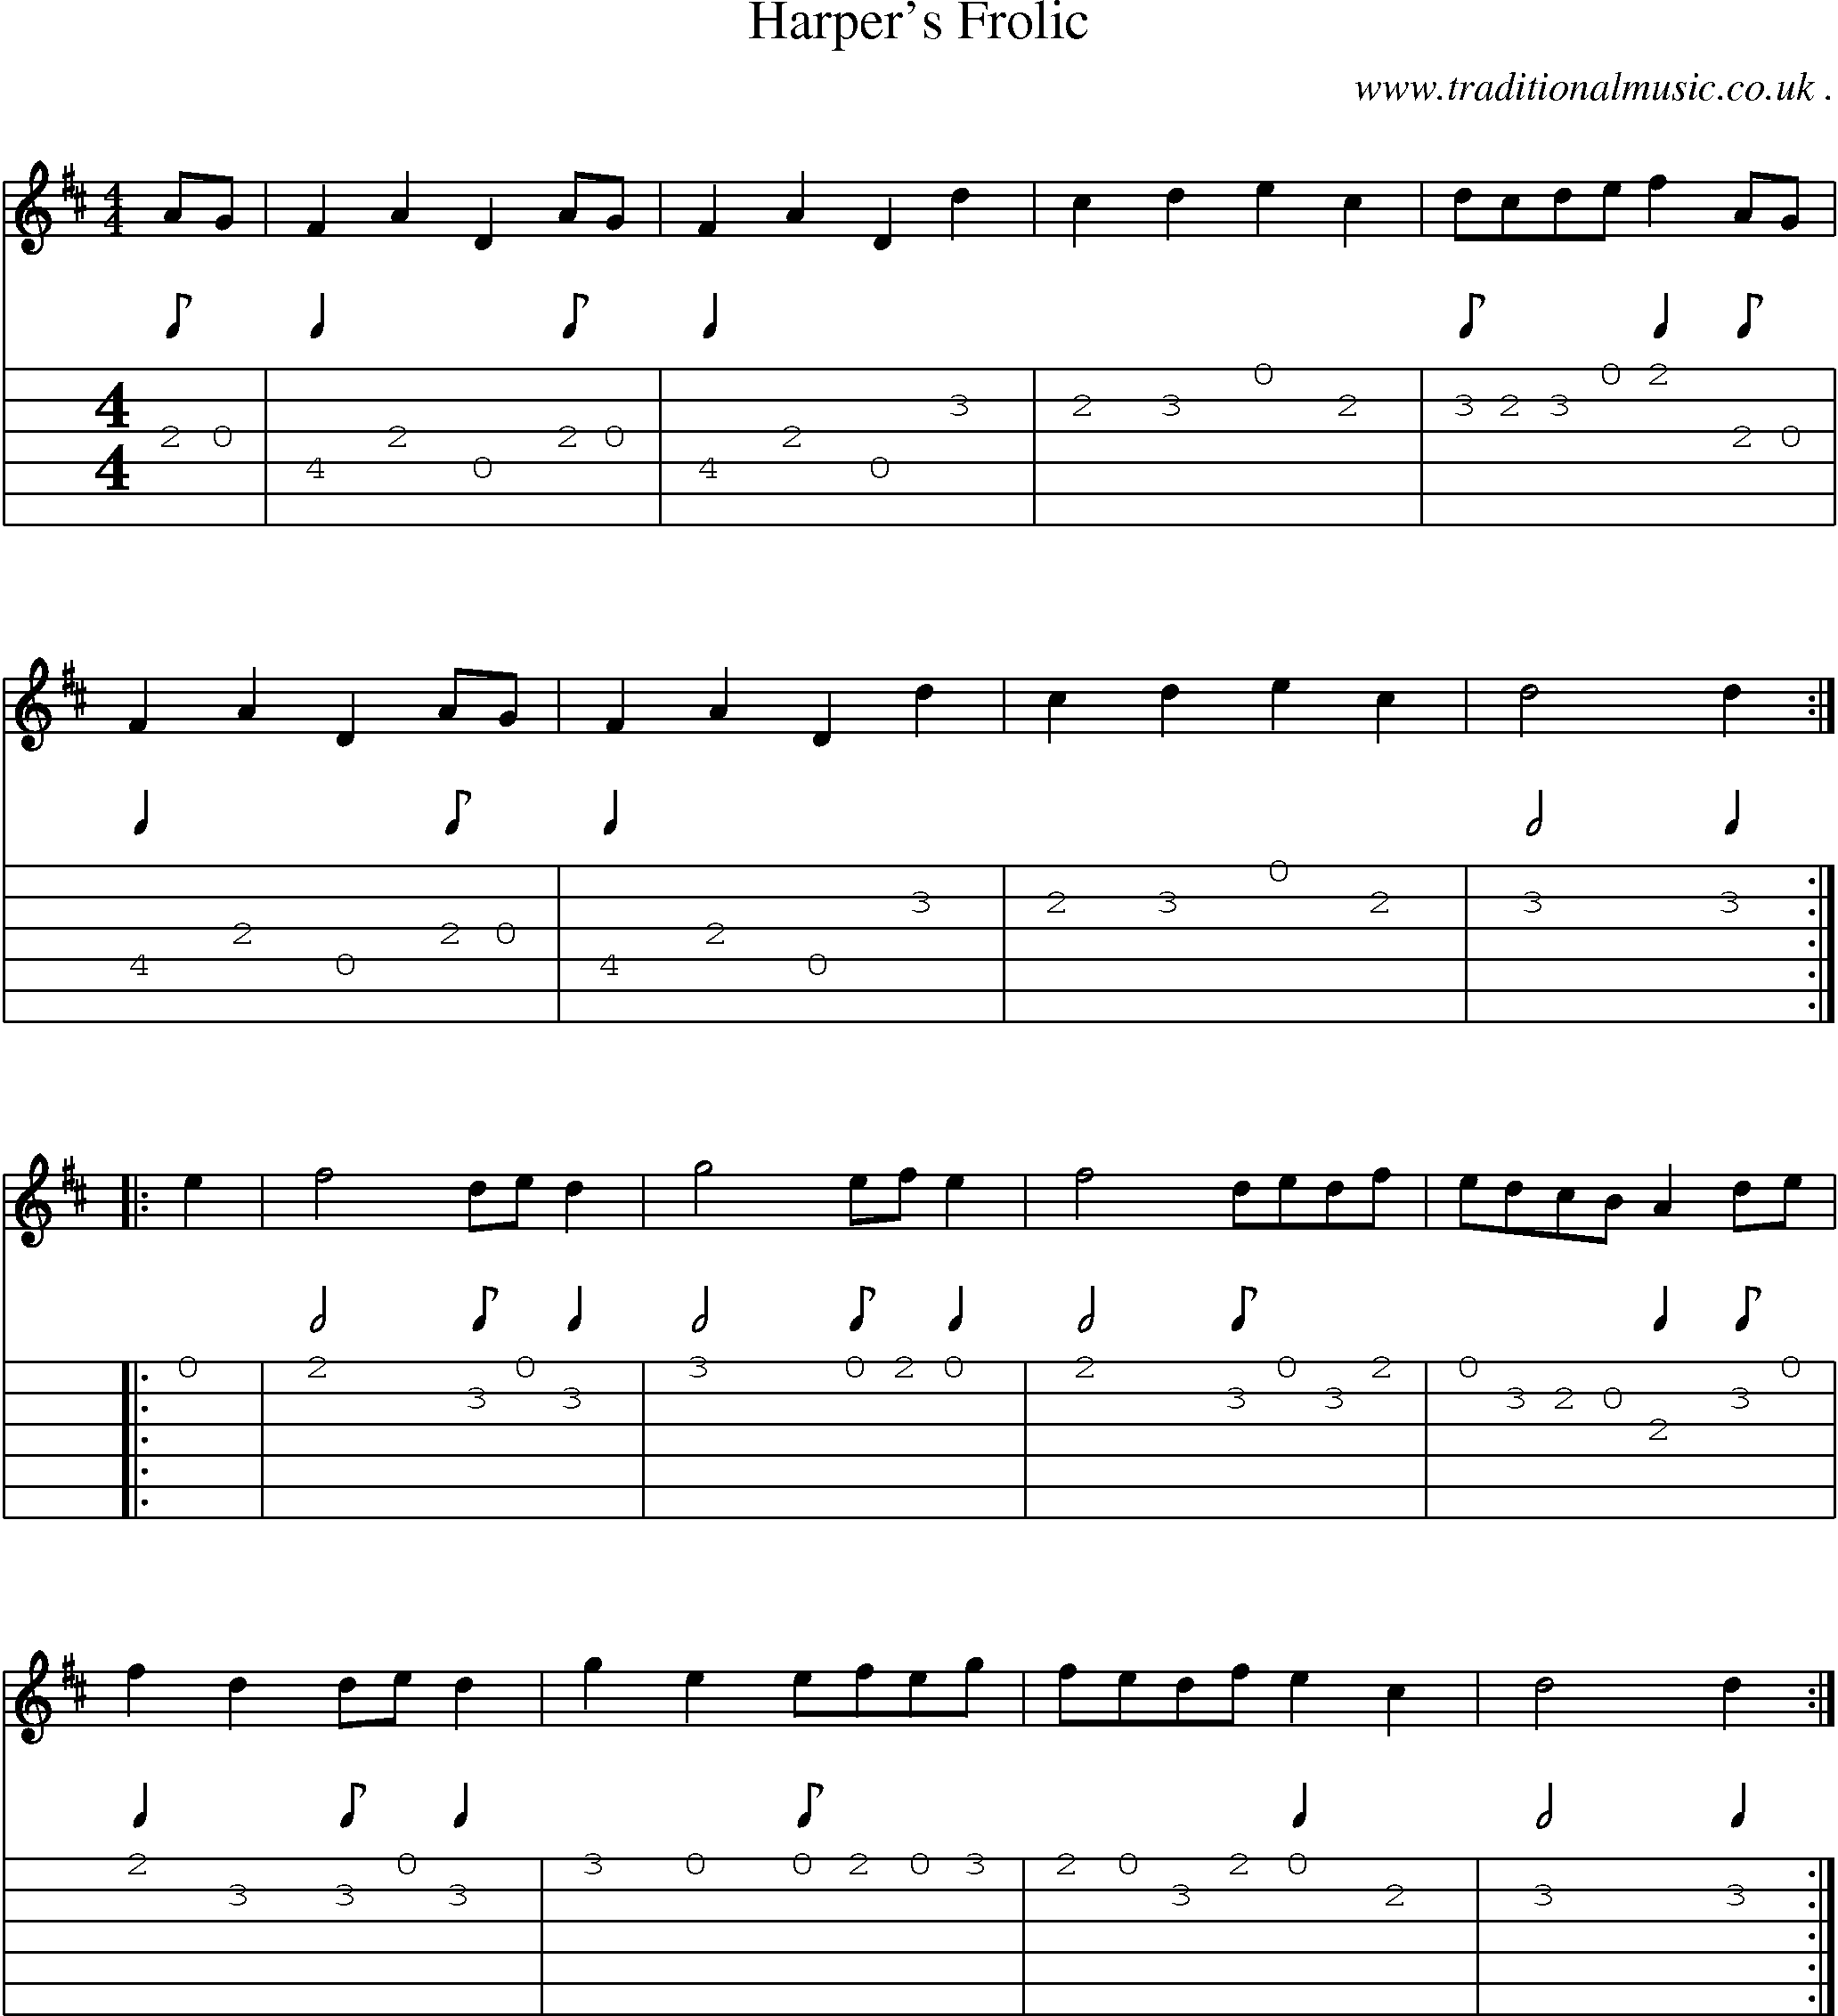 Sheet-Music and Guitar Tabs for Harpers Frolic